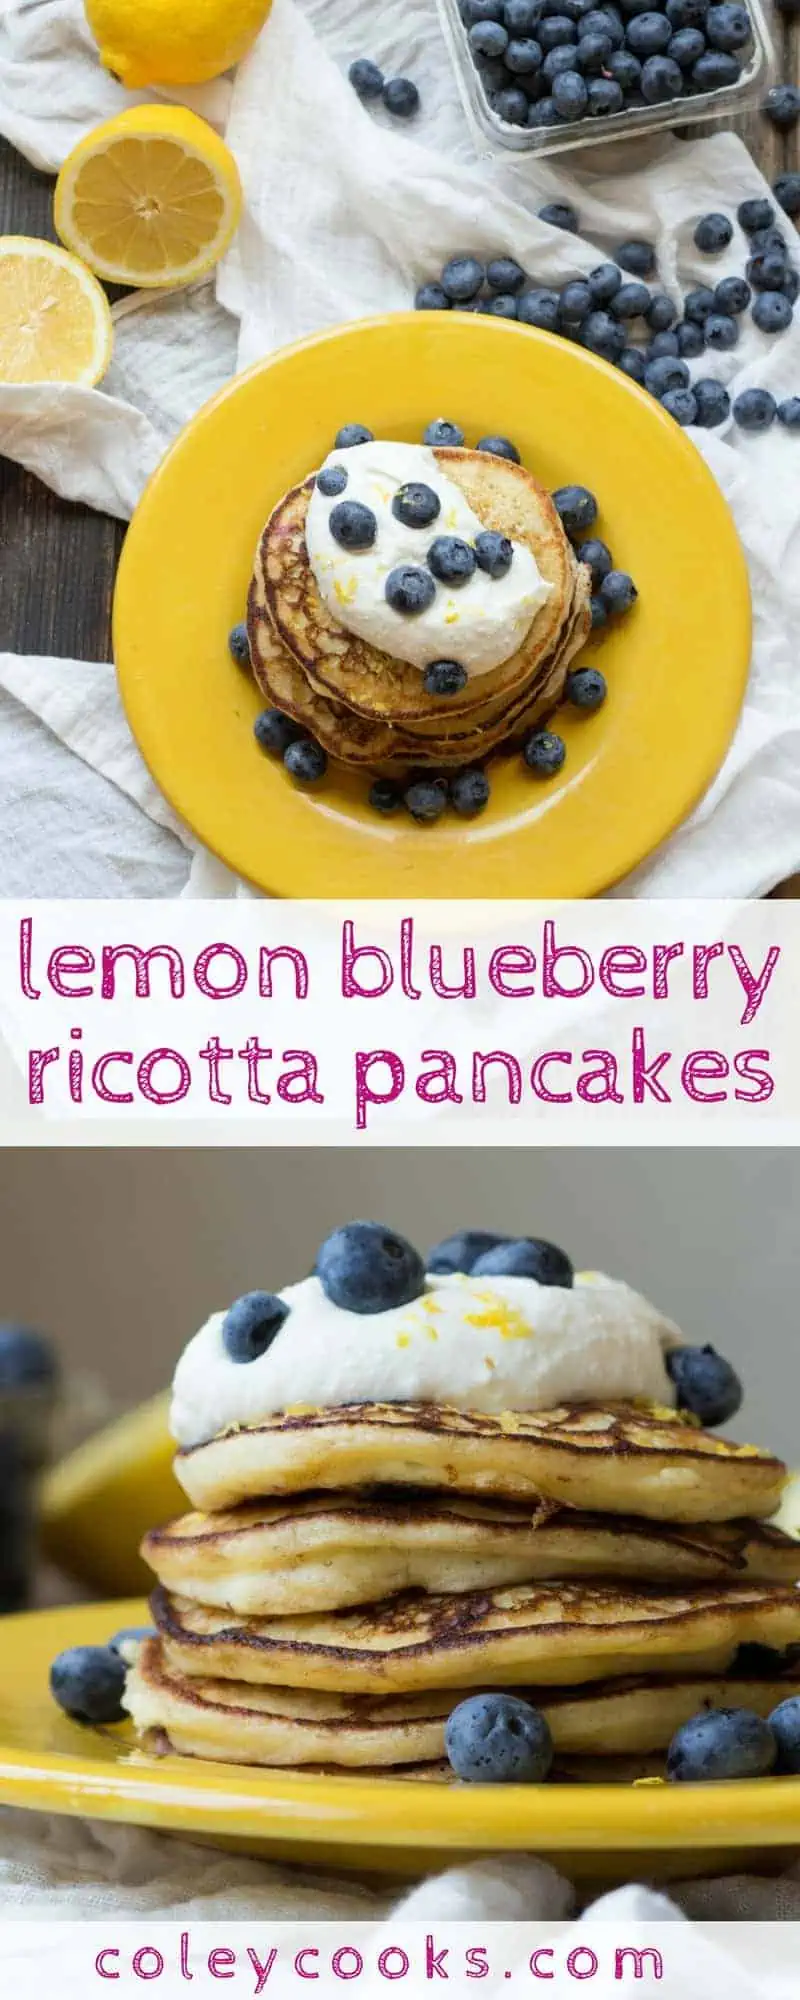 LEMON BLUEBERRY RICOTTA PANCAKES | The best summer breakfast or brunch pancake recipe! Creamy and fluffy with a little tang from the lemon and blueberries. | ColeyCooks.com